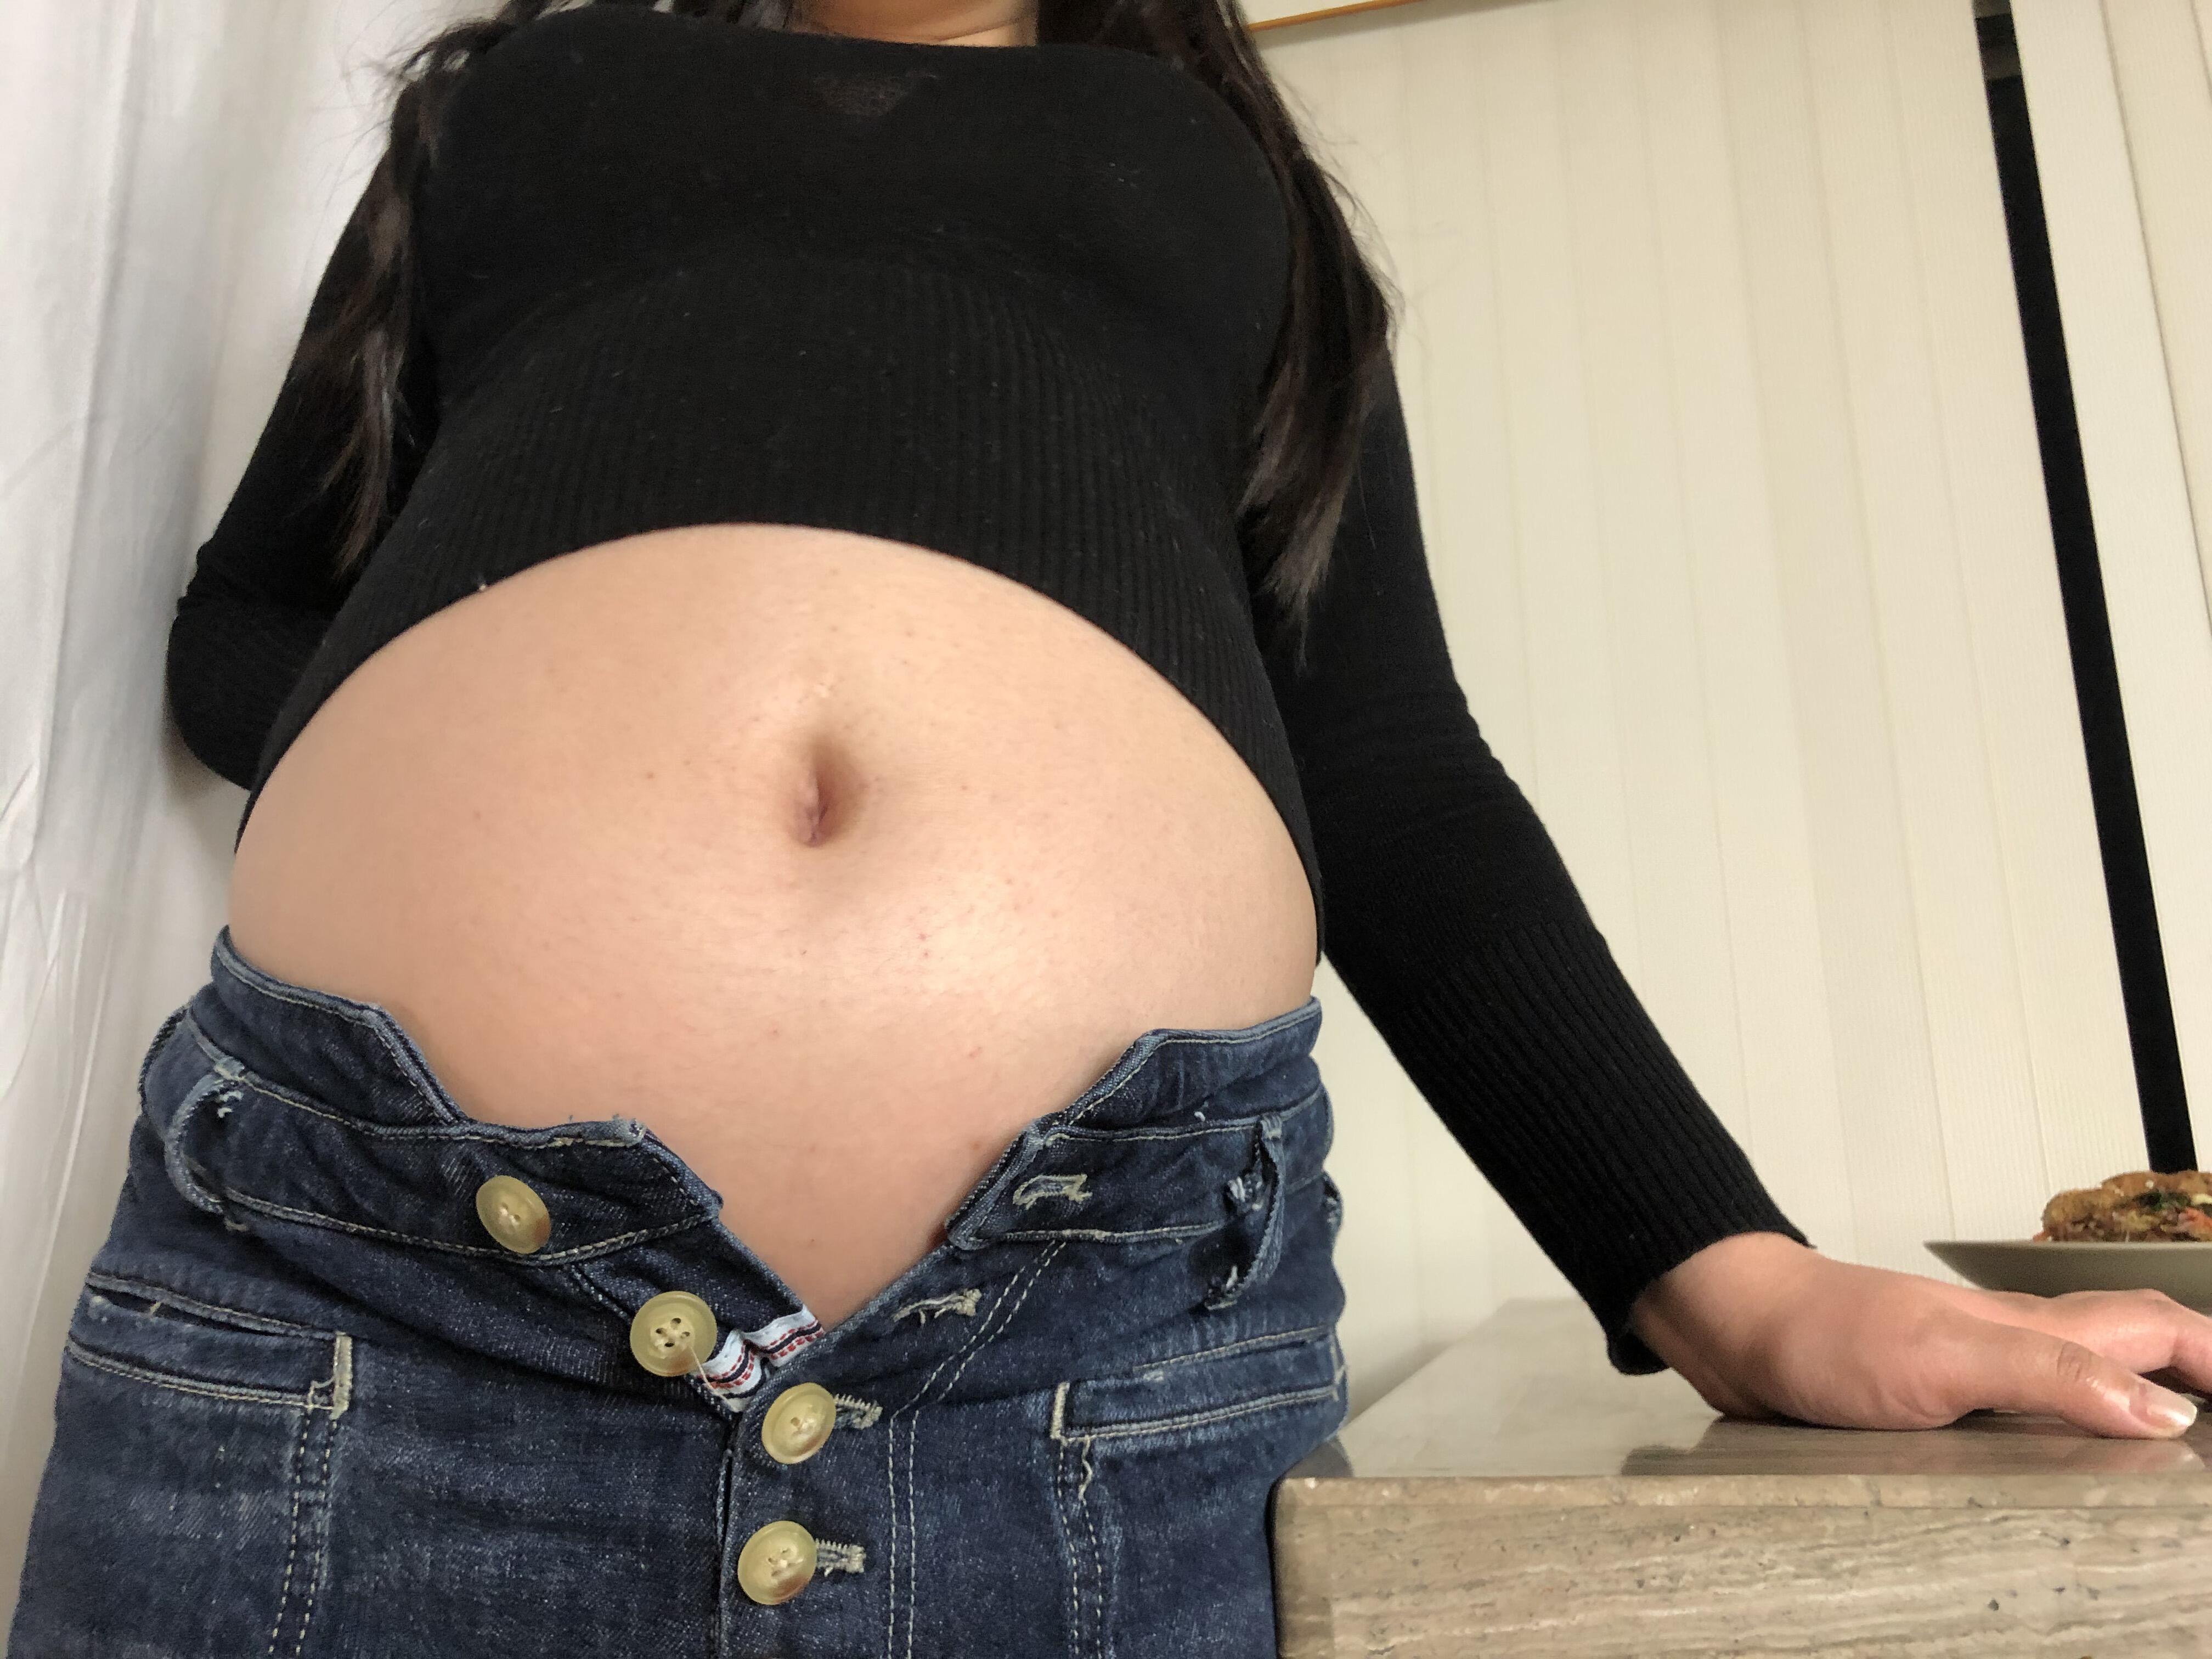 Video Huge Stuffed Belly Straining Against 5 Button Pants! (